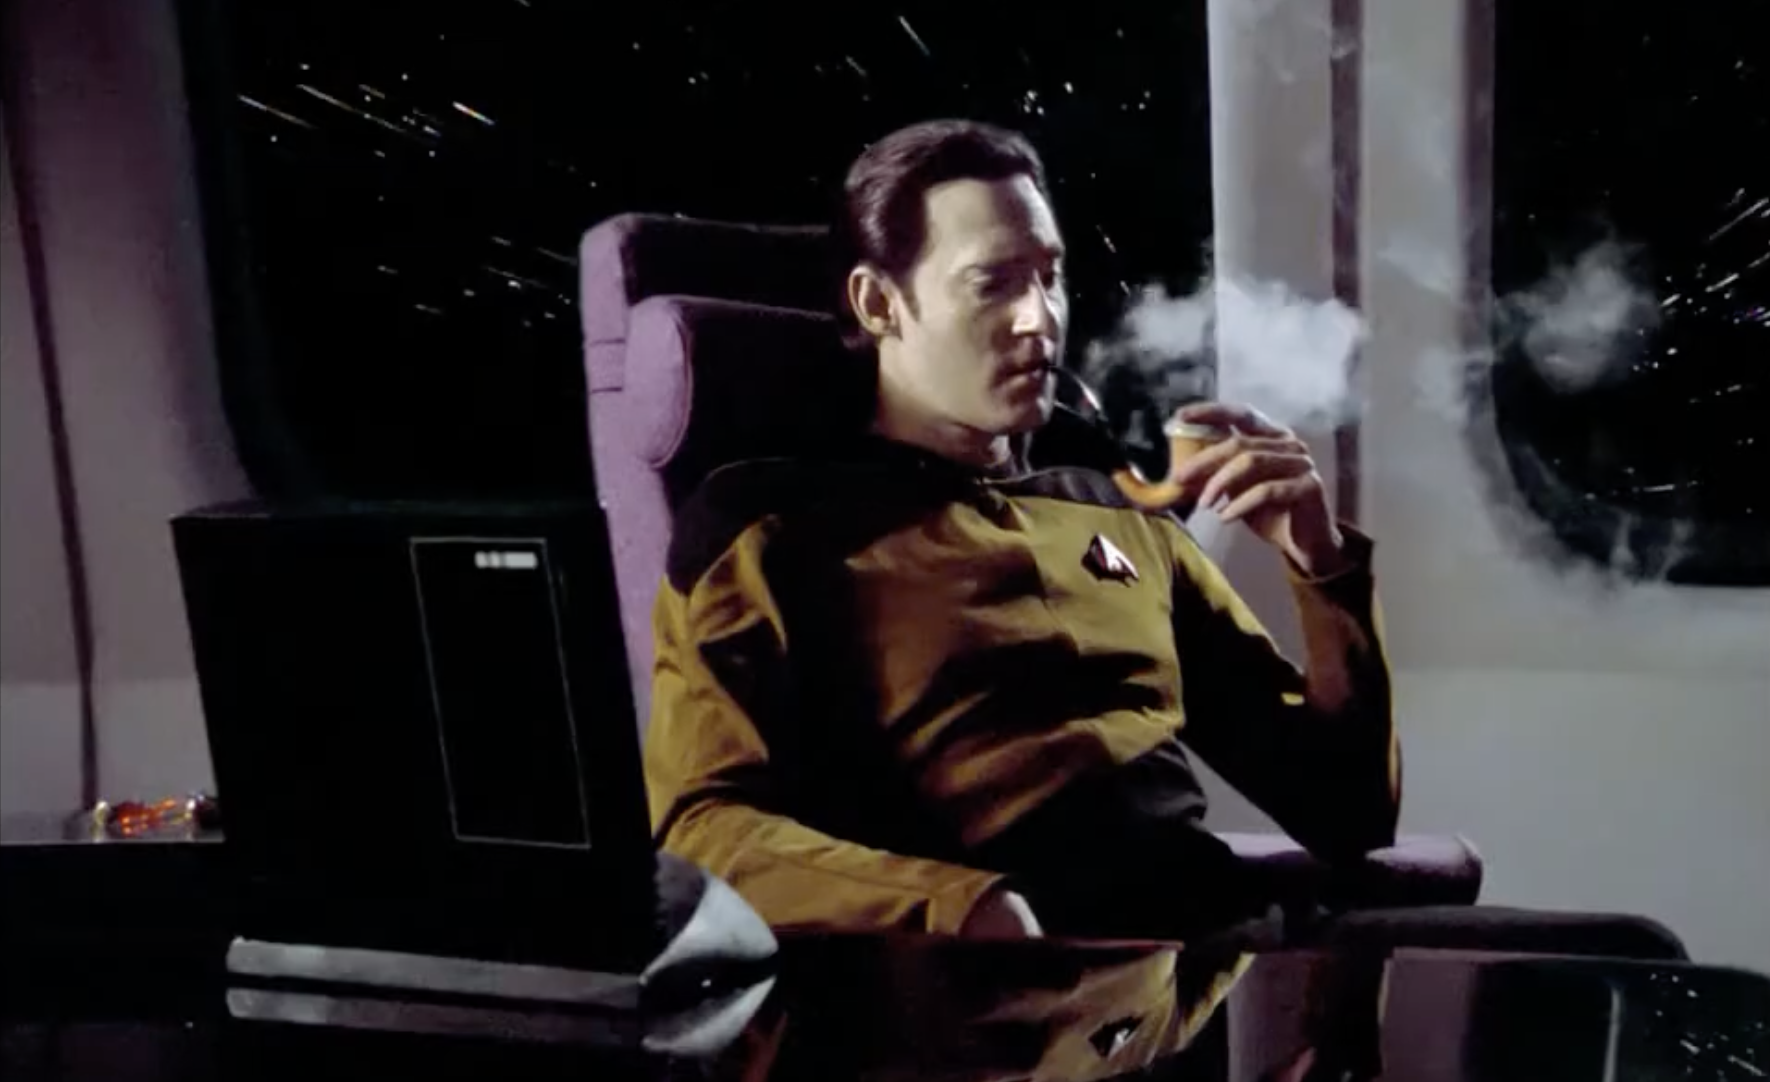 The character Data from Star Trek: The Next Generation is smoking a pipe.